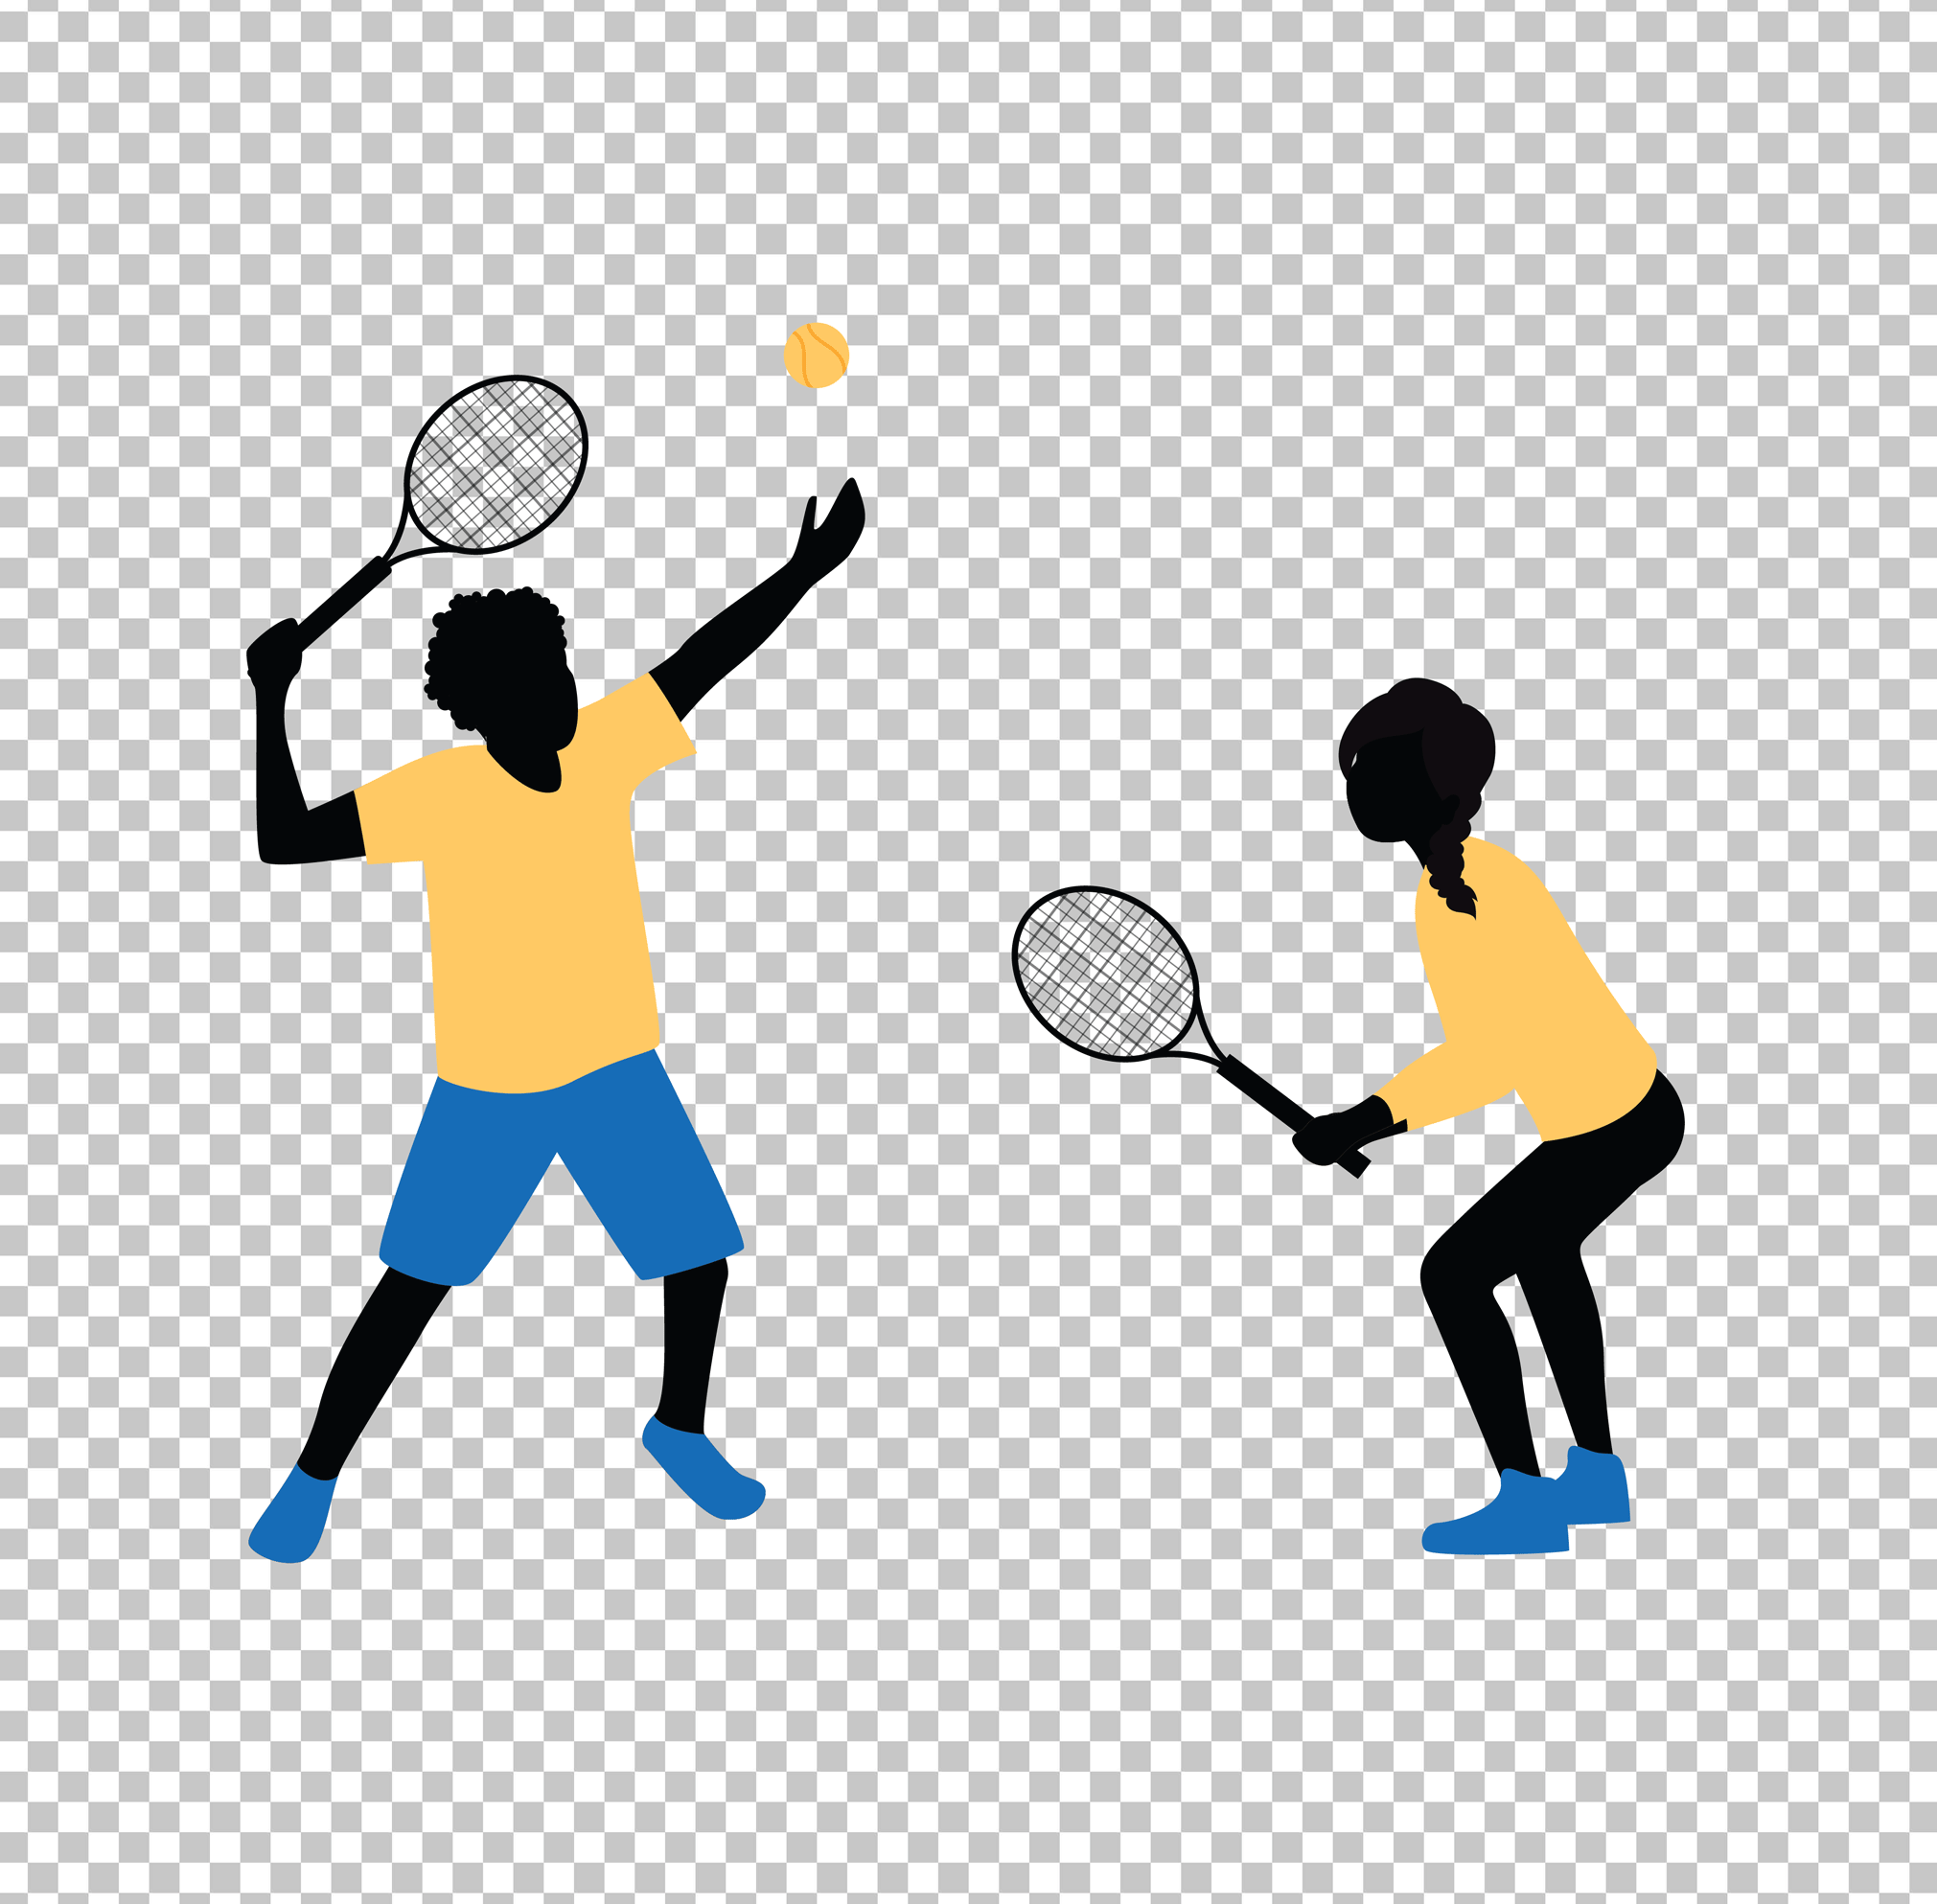 Two player playing tennis Illustration